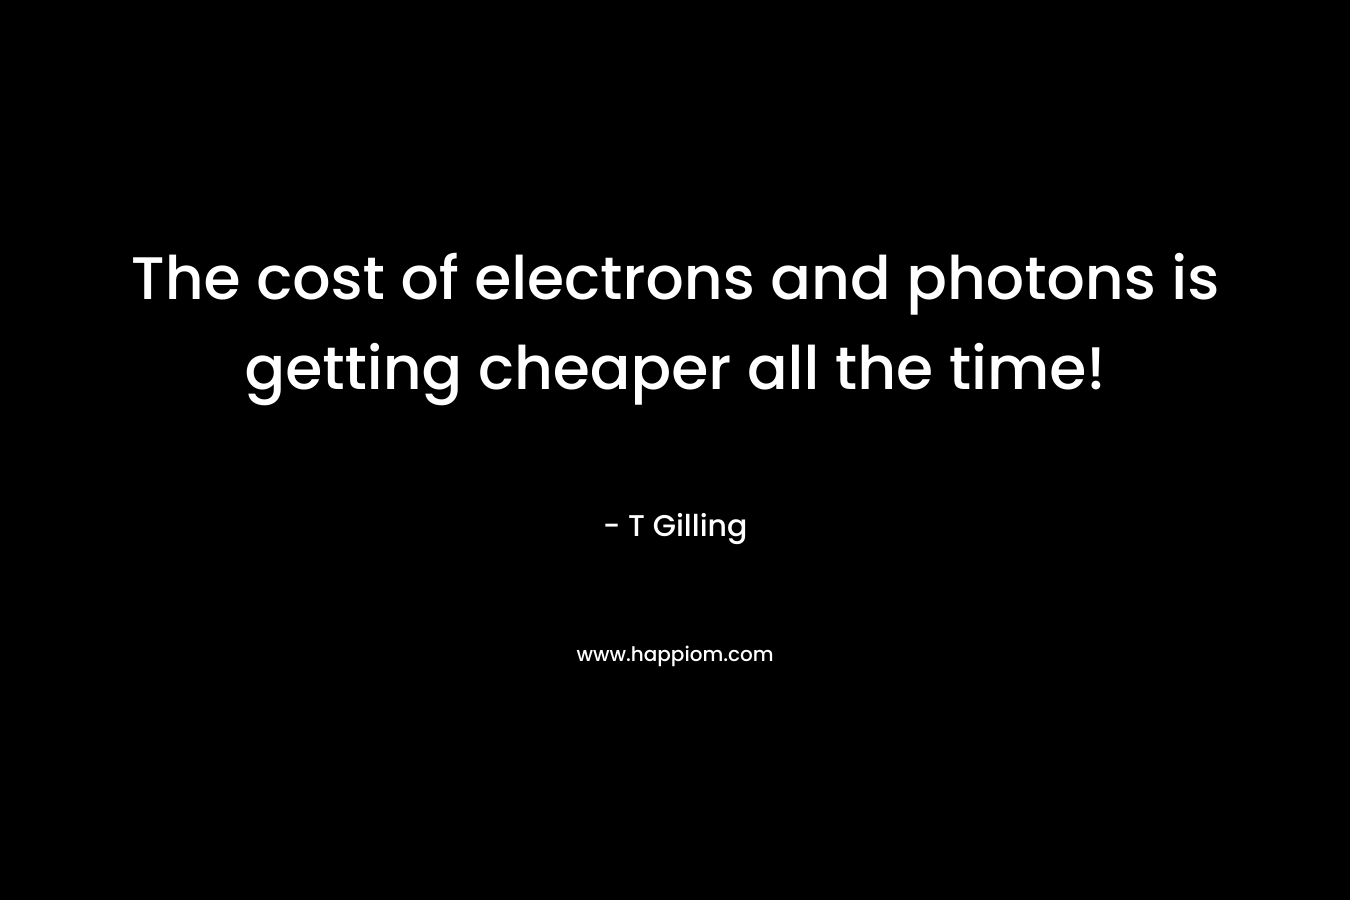 The cost of electrons and photons is getting cheaper all the time!